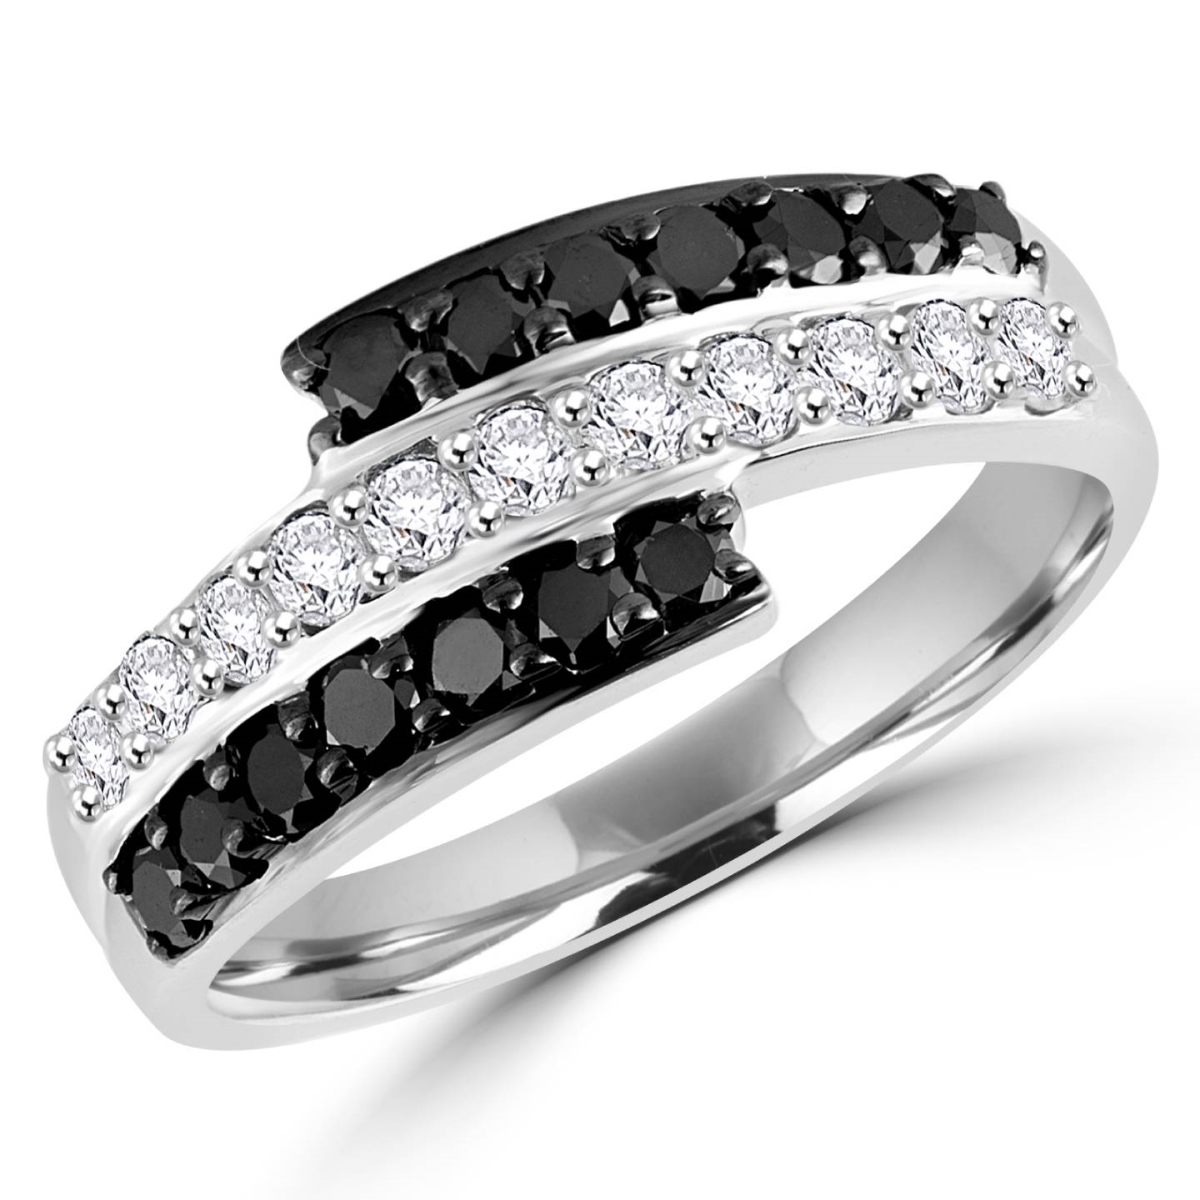 Picture of Majesty Diamonds MDR140130-P 0.75 CTW Black & White Round Diamond Fashion Cocktail Ring in 14K White Gold